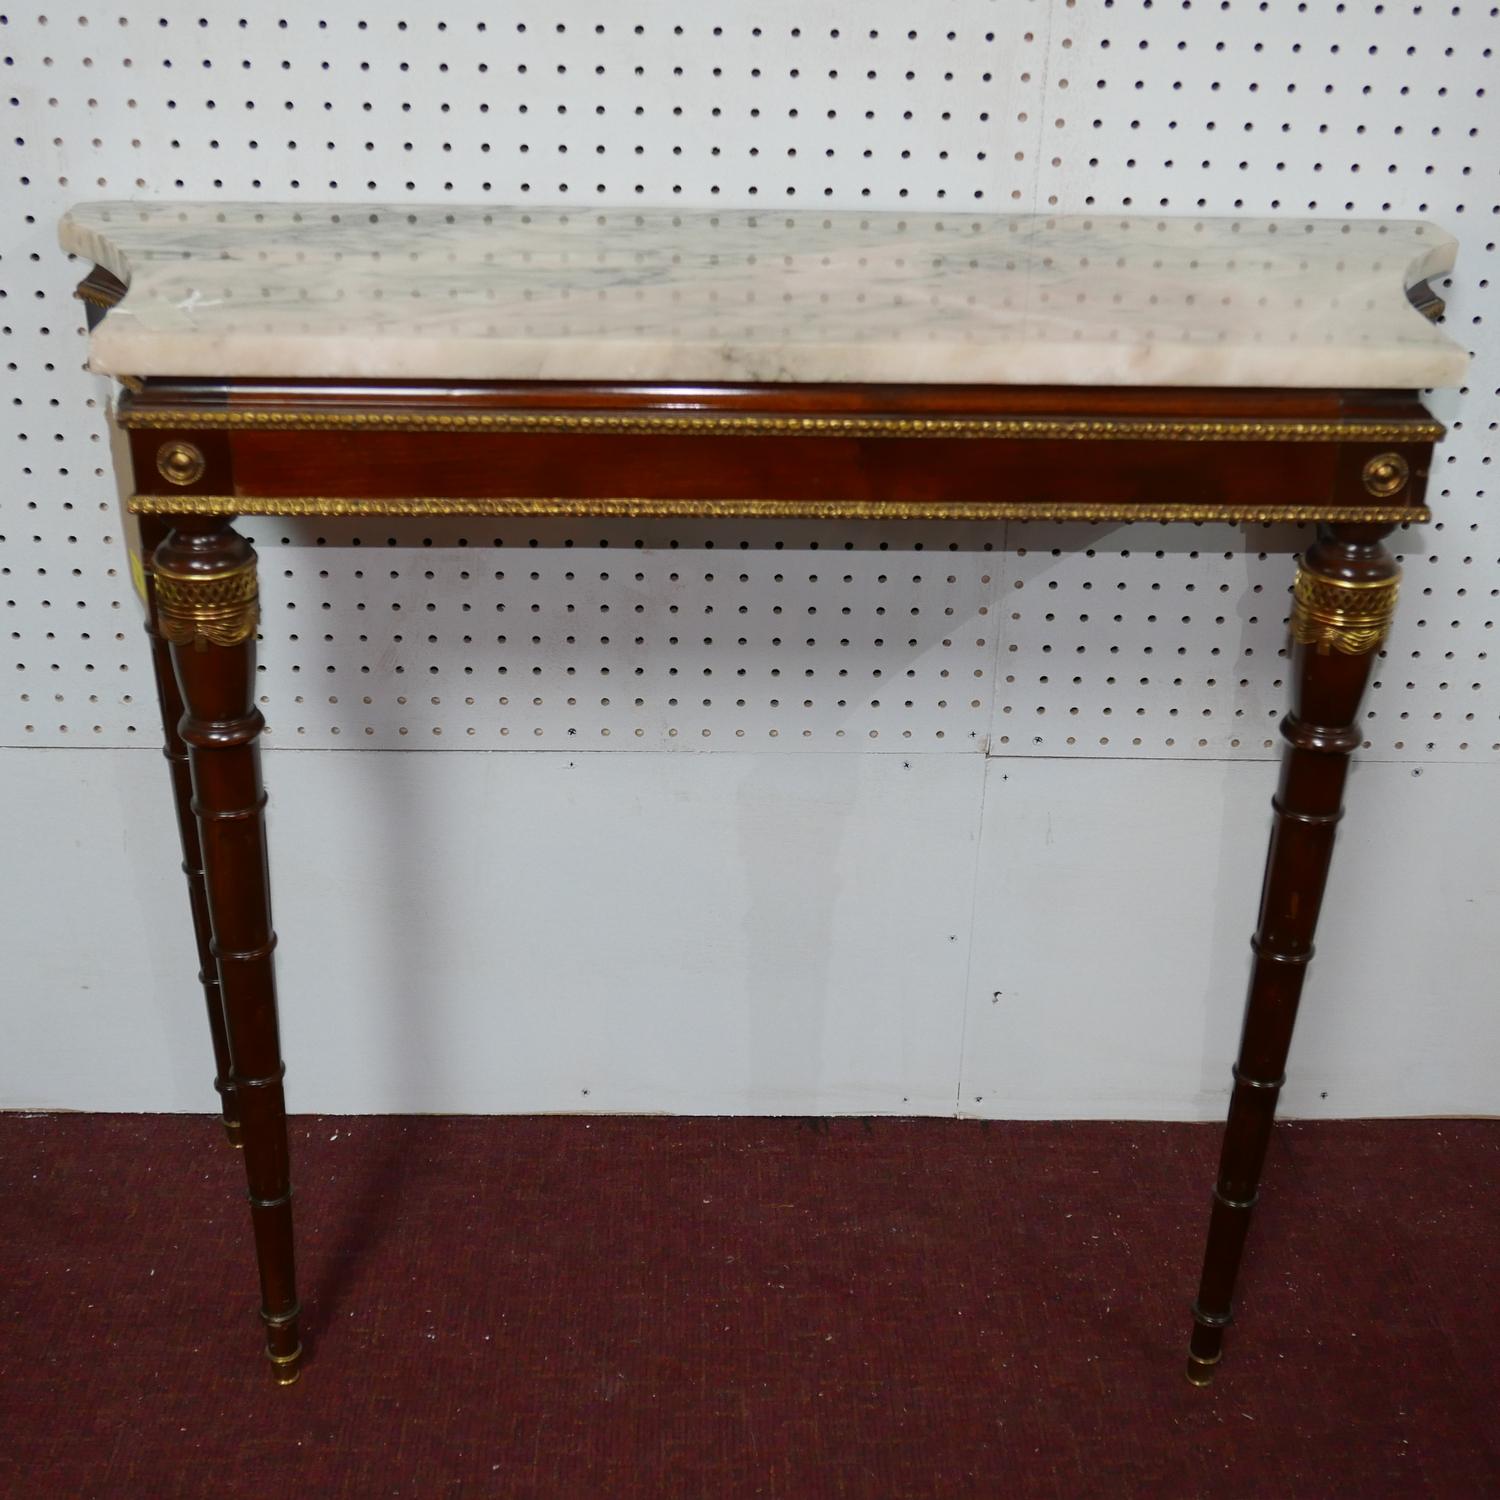 A Louis XVI style mahogany and gilt metal mounted console table, with variegated marble top, on